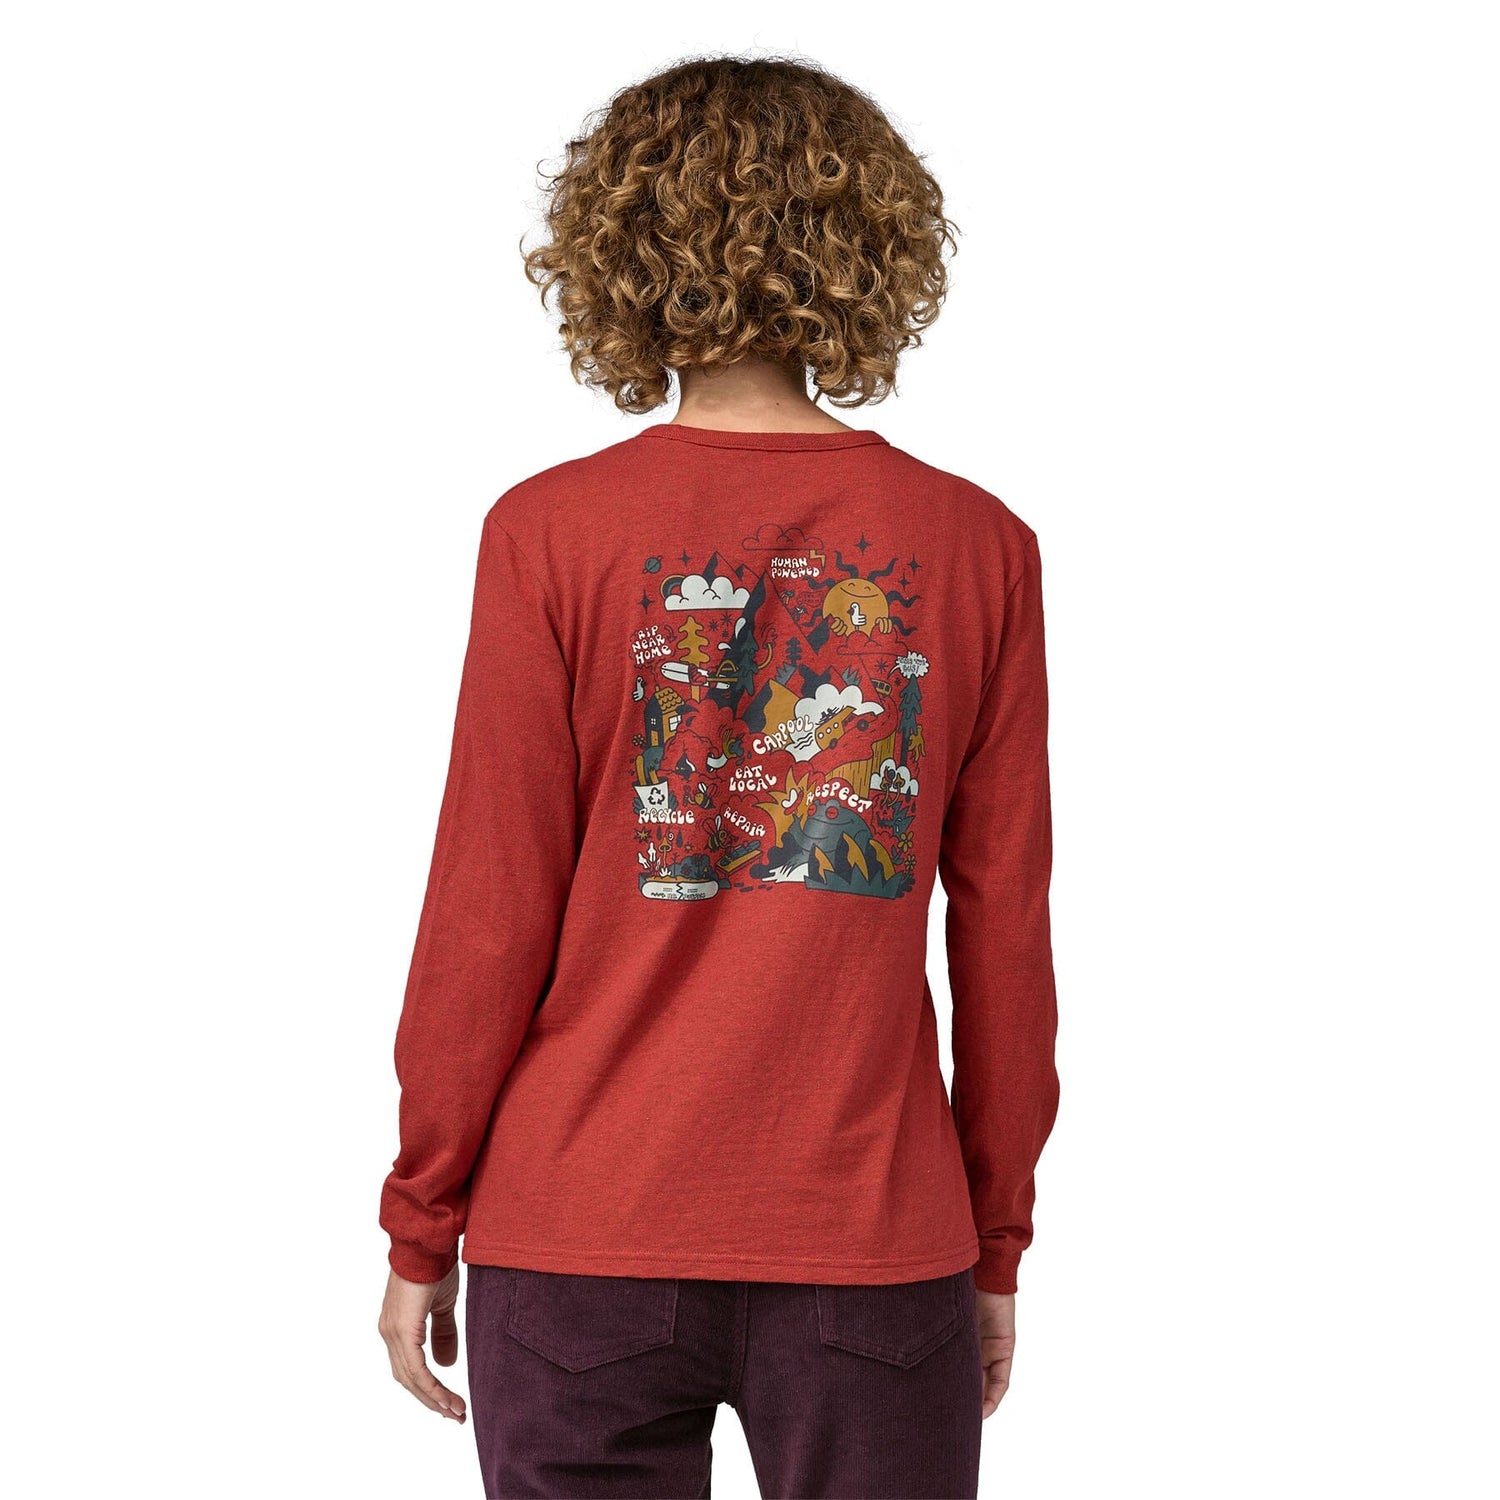 Patagonia W's L/S How To Slide Responsibili-Tee - Recycled Cotton & Recycled Polyester Burl Red Shirt